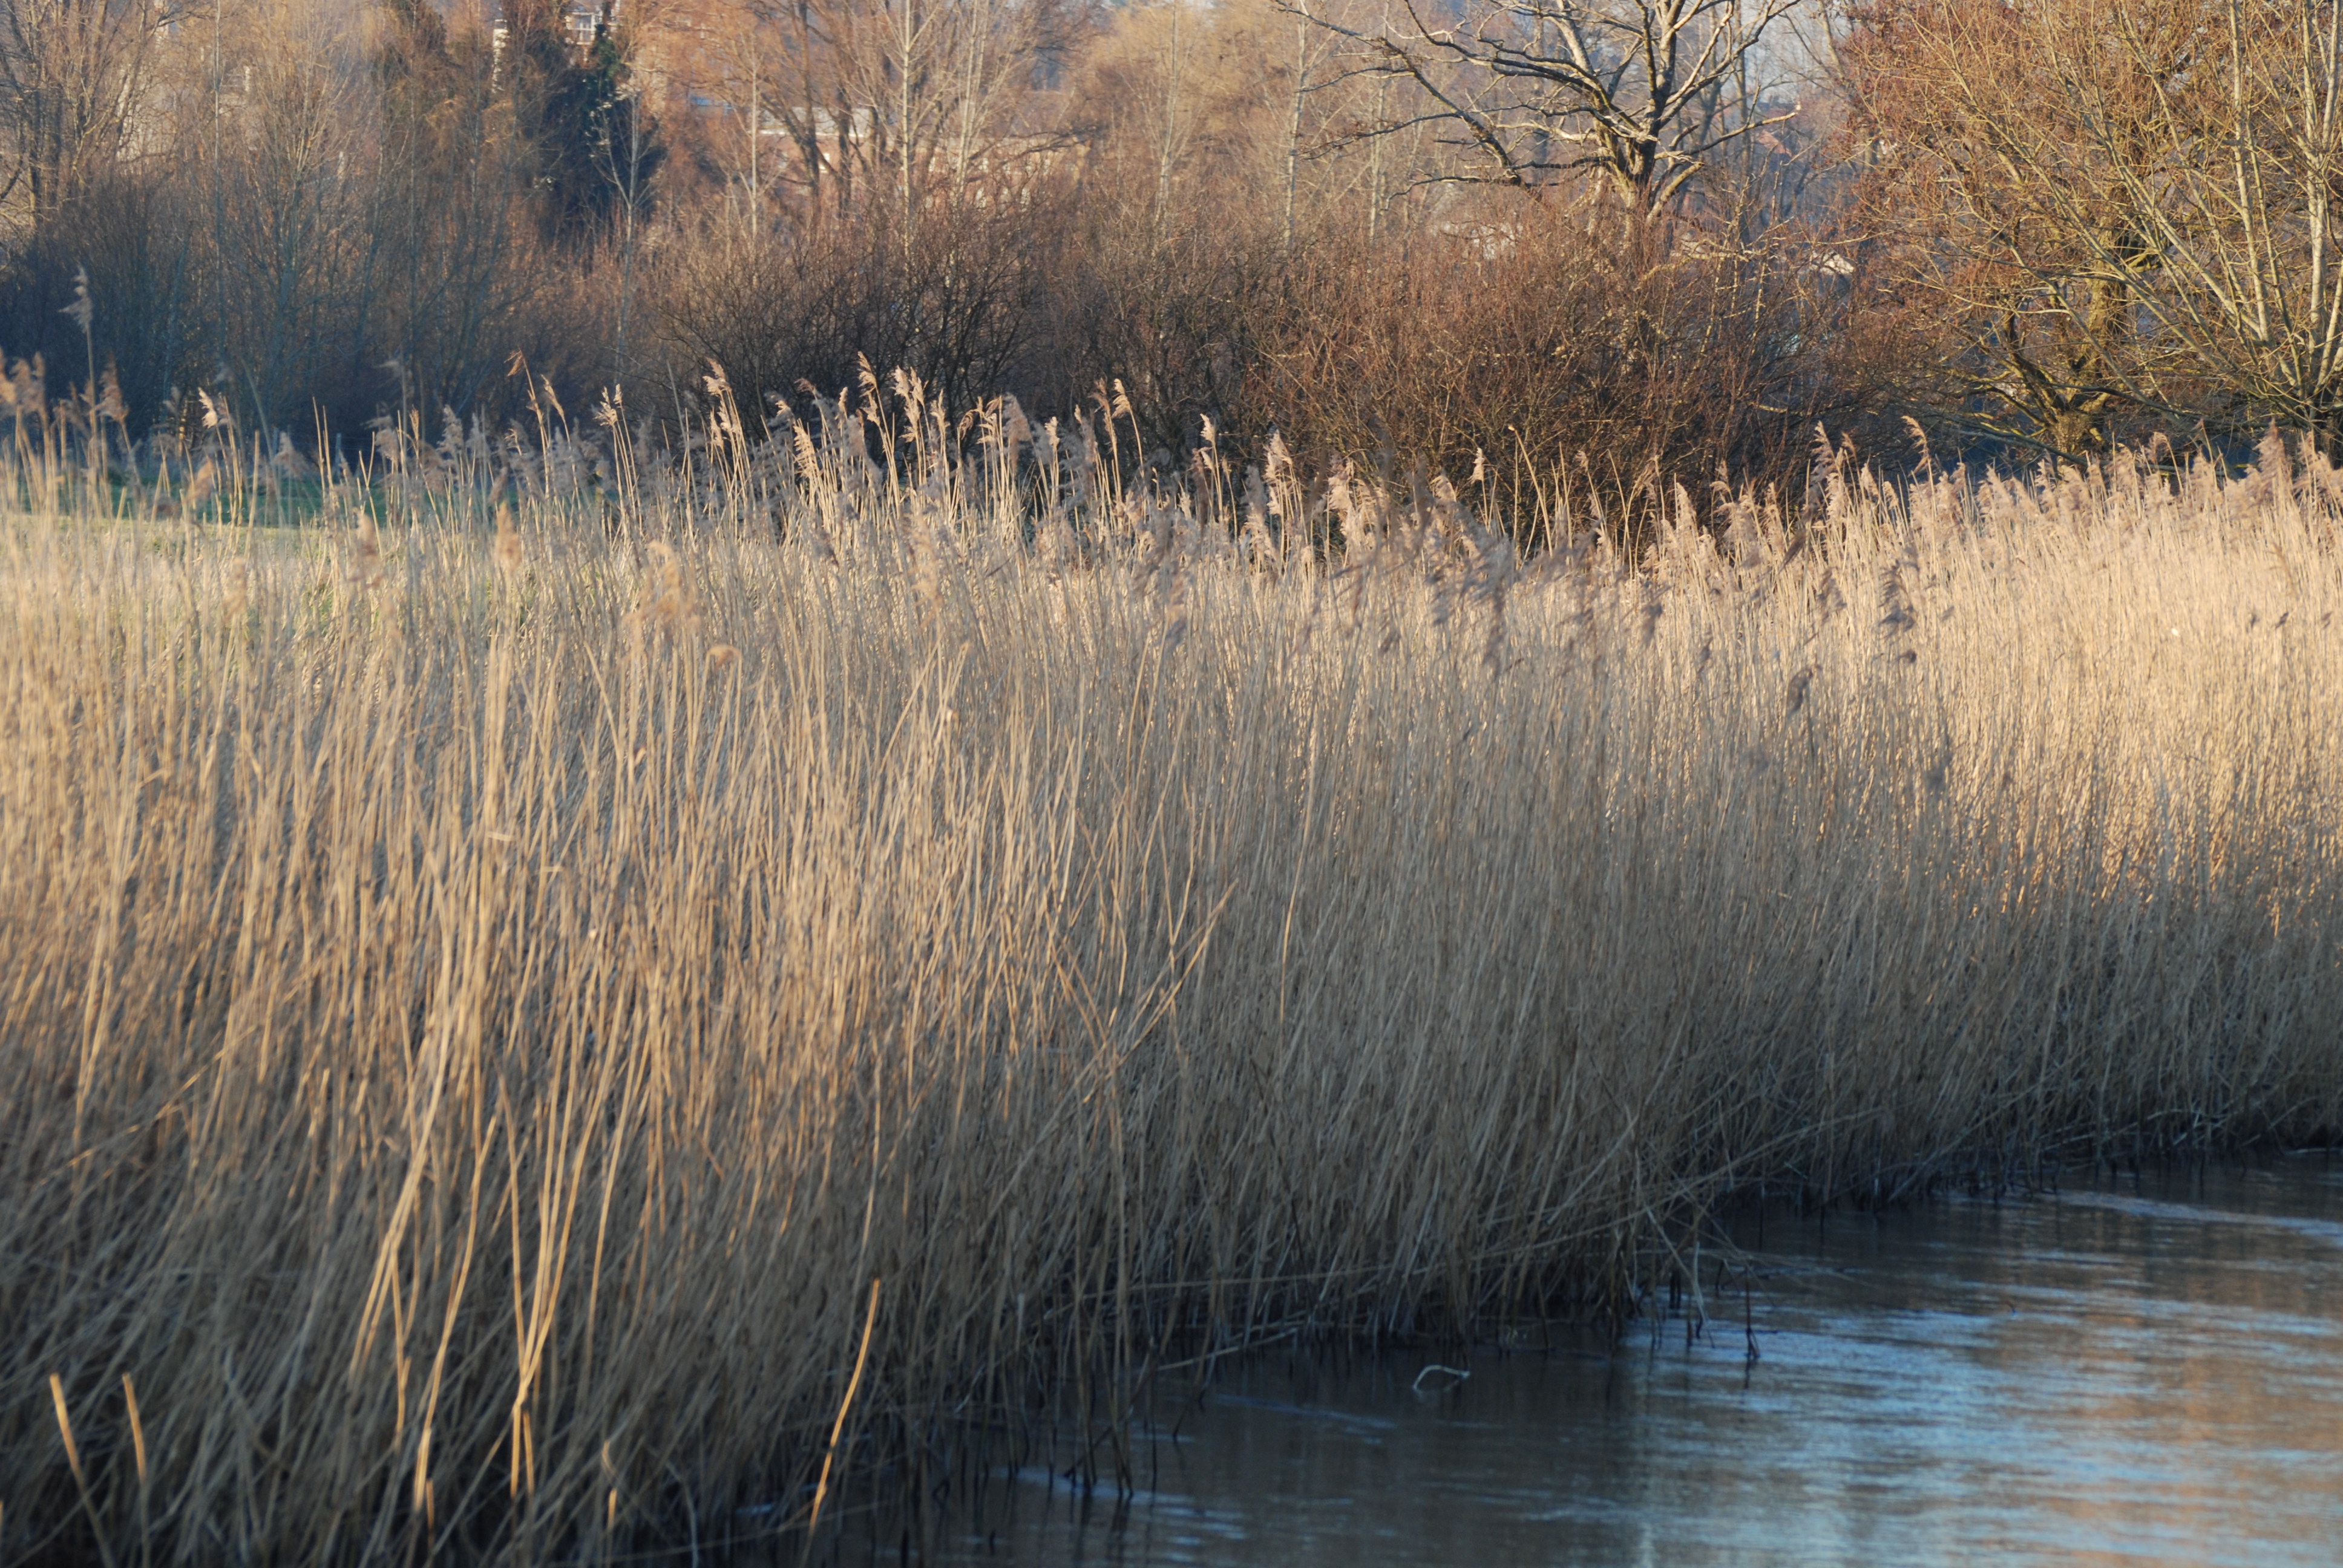 File:Reed beds - River Nadder at Harnham.jpg - Wikimedia Commons